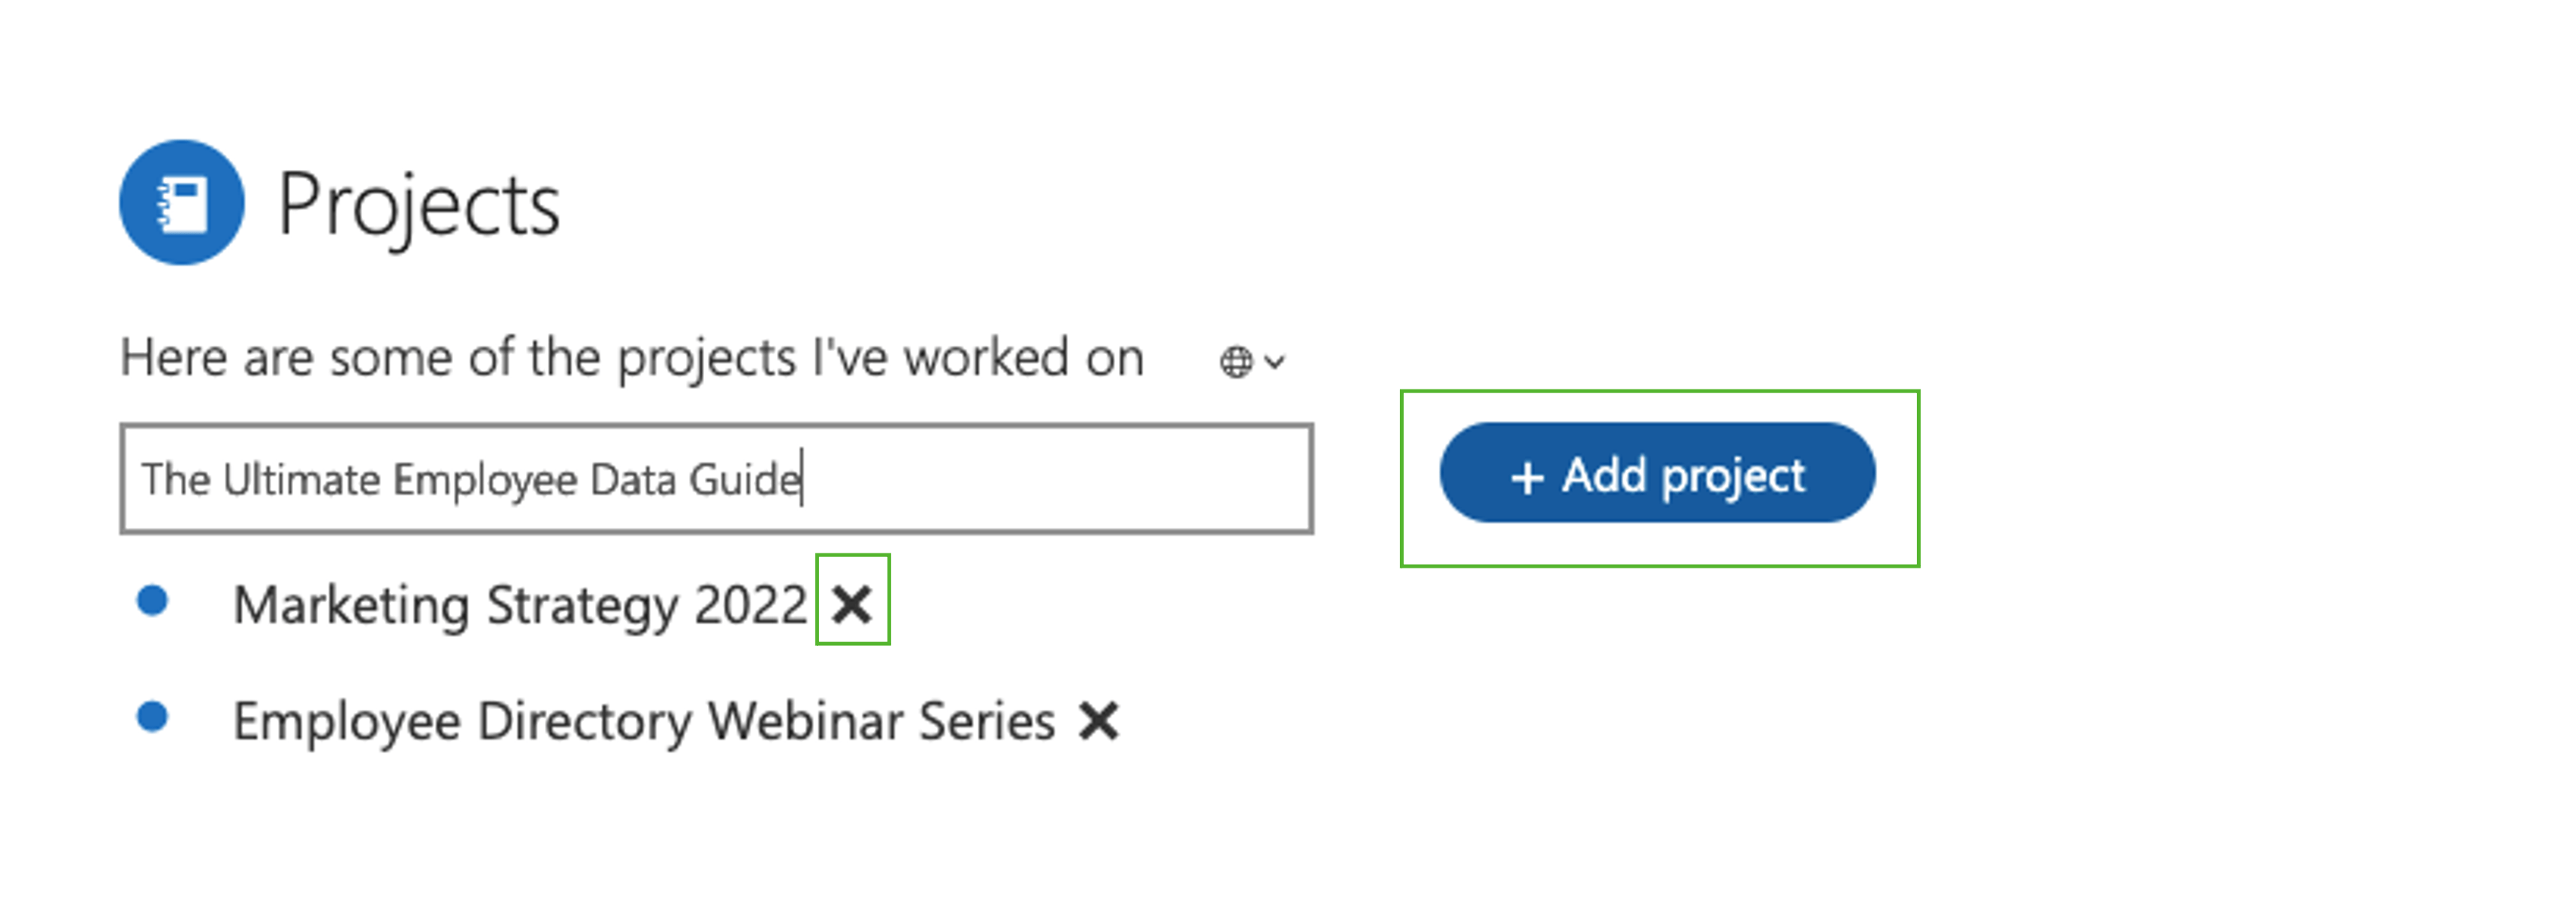 Add projects in Microsoft Delve